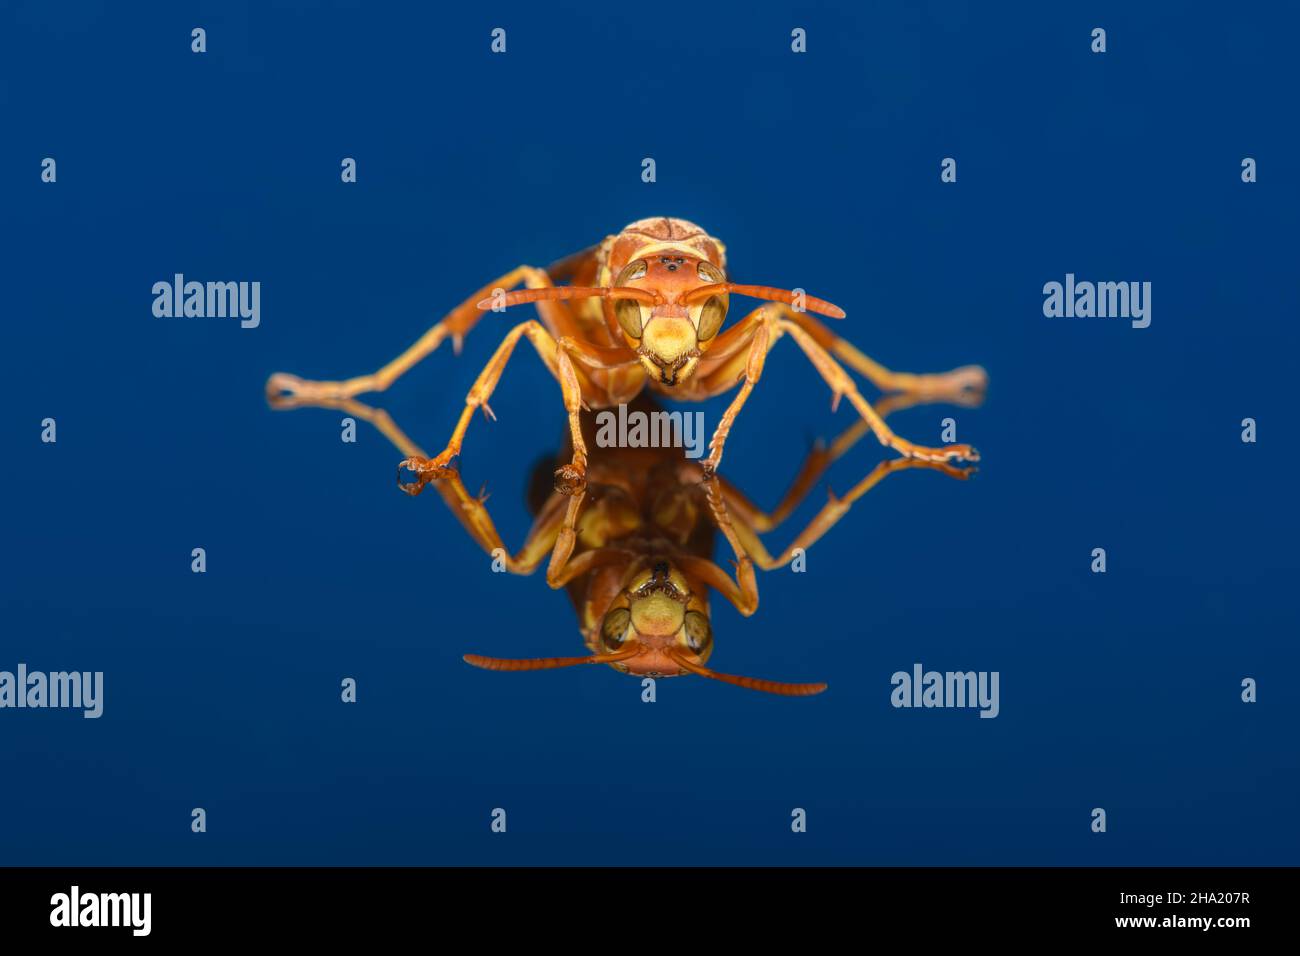 Texas Paper Wasp Polistes apachus - Apache Paper Wasp - on dark blue background. Close-up detailed macro front face, eyes and antenna Stock Photo